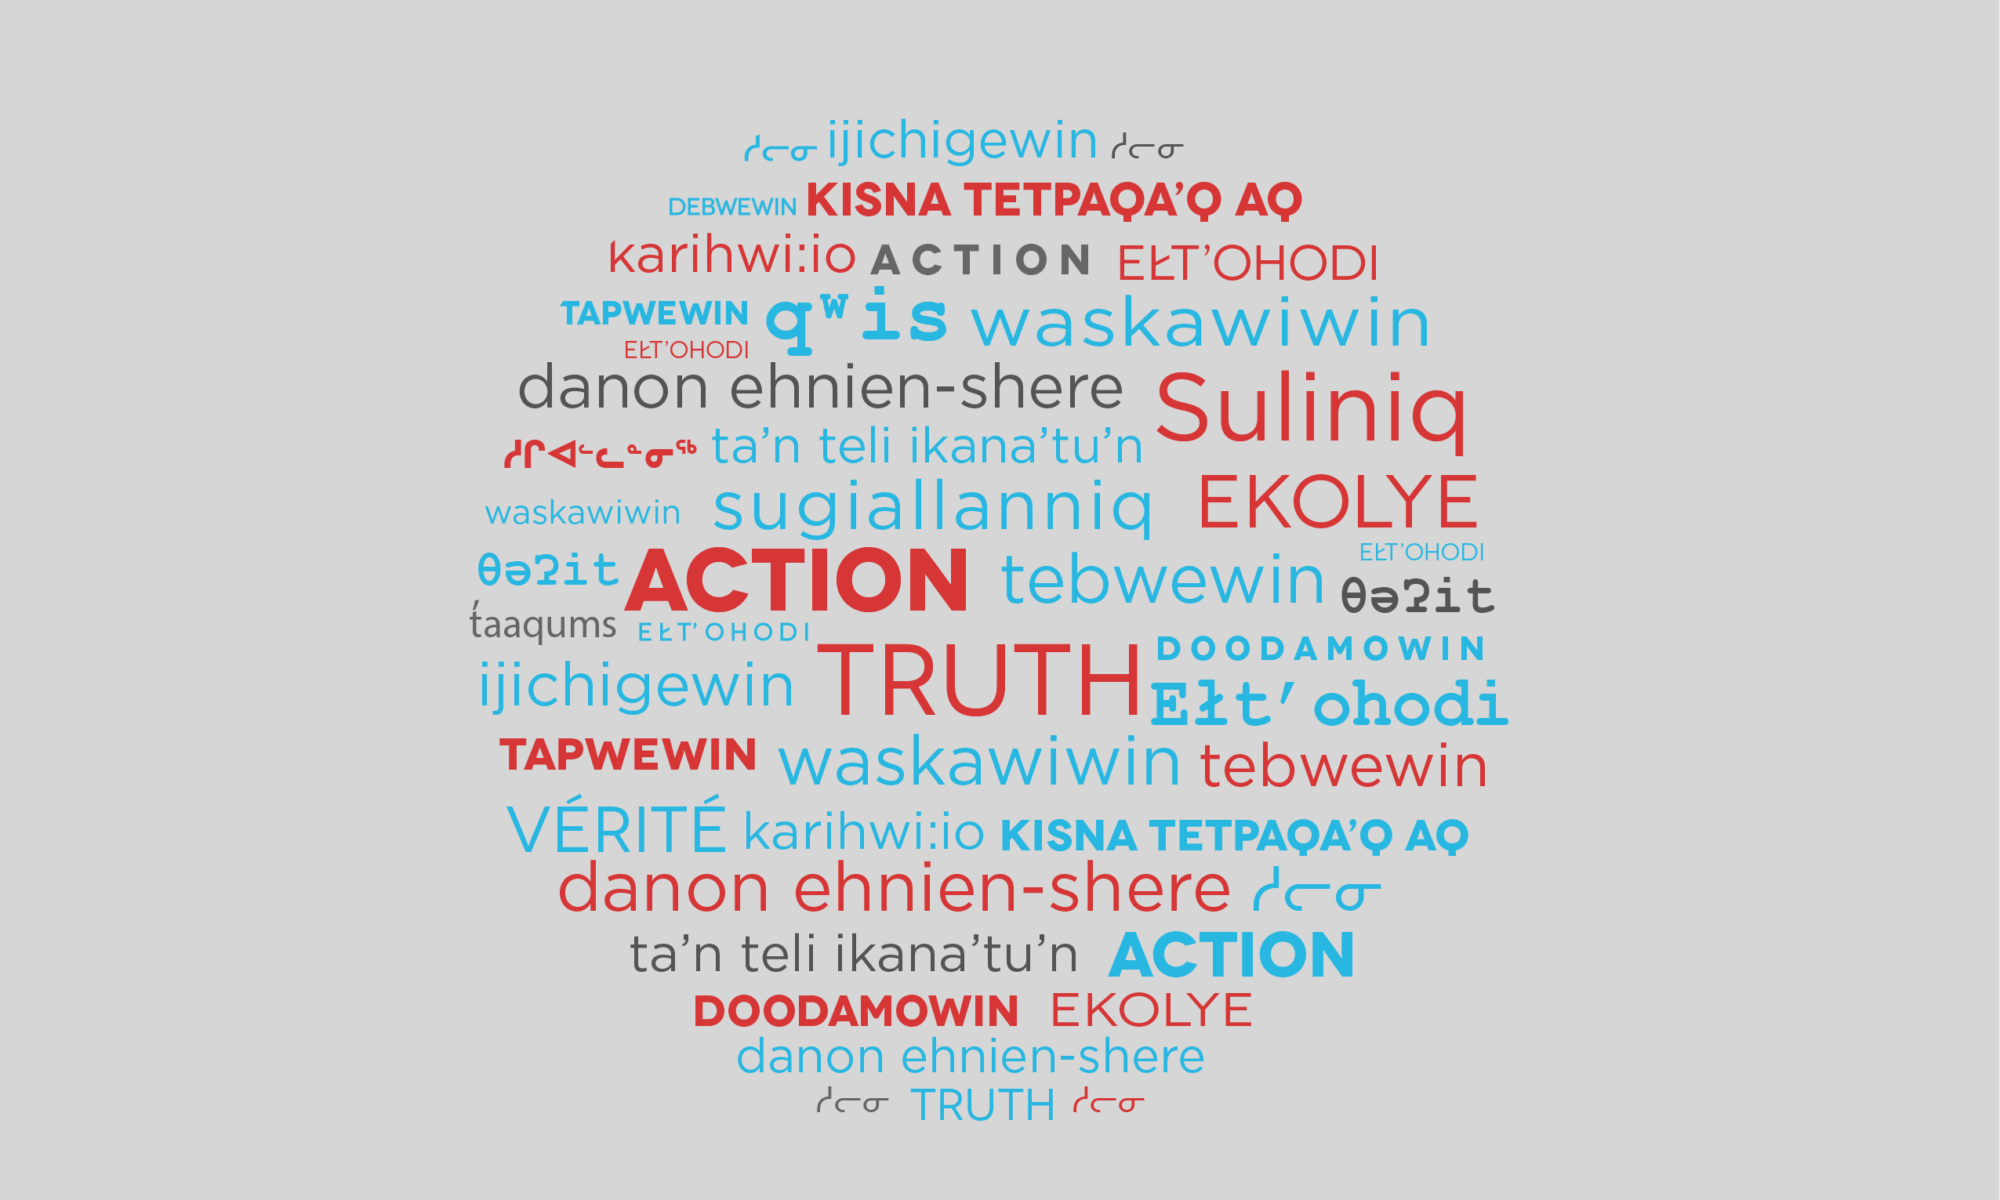 Action and Truth in various languages notably Indigenous languages